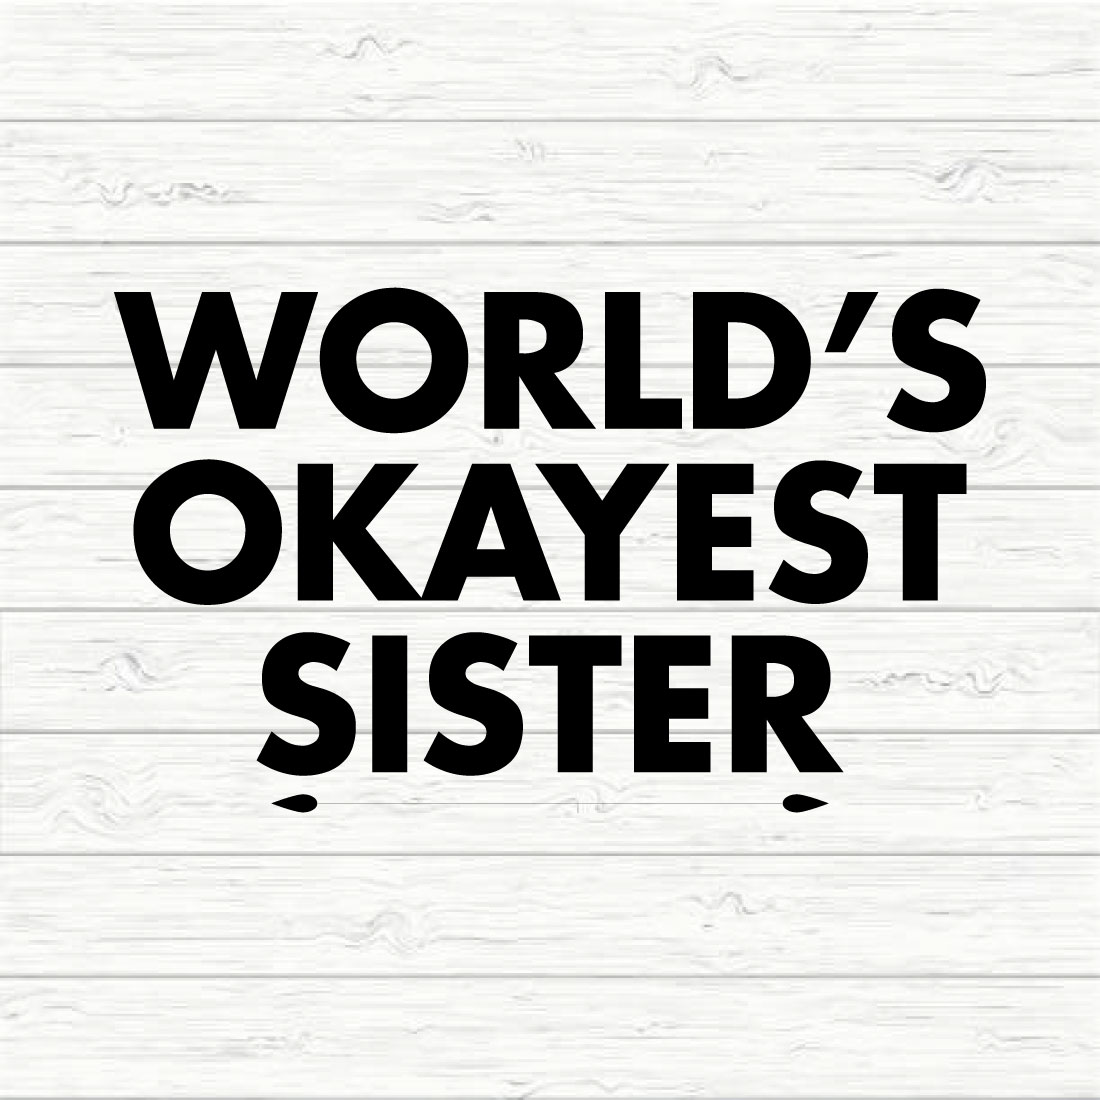 World's Okayest Sister preview image.